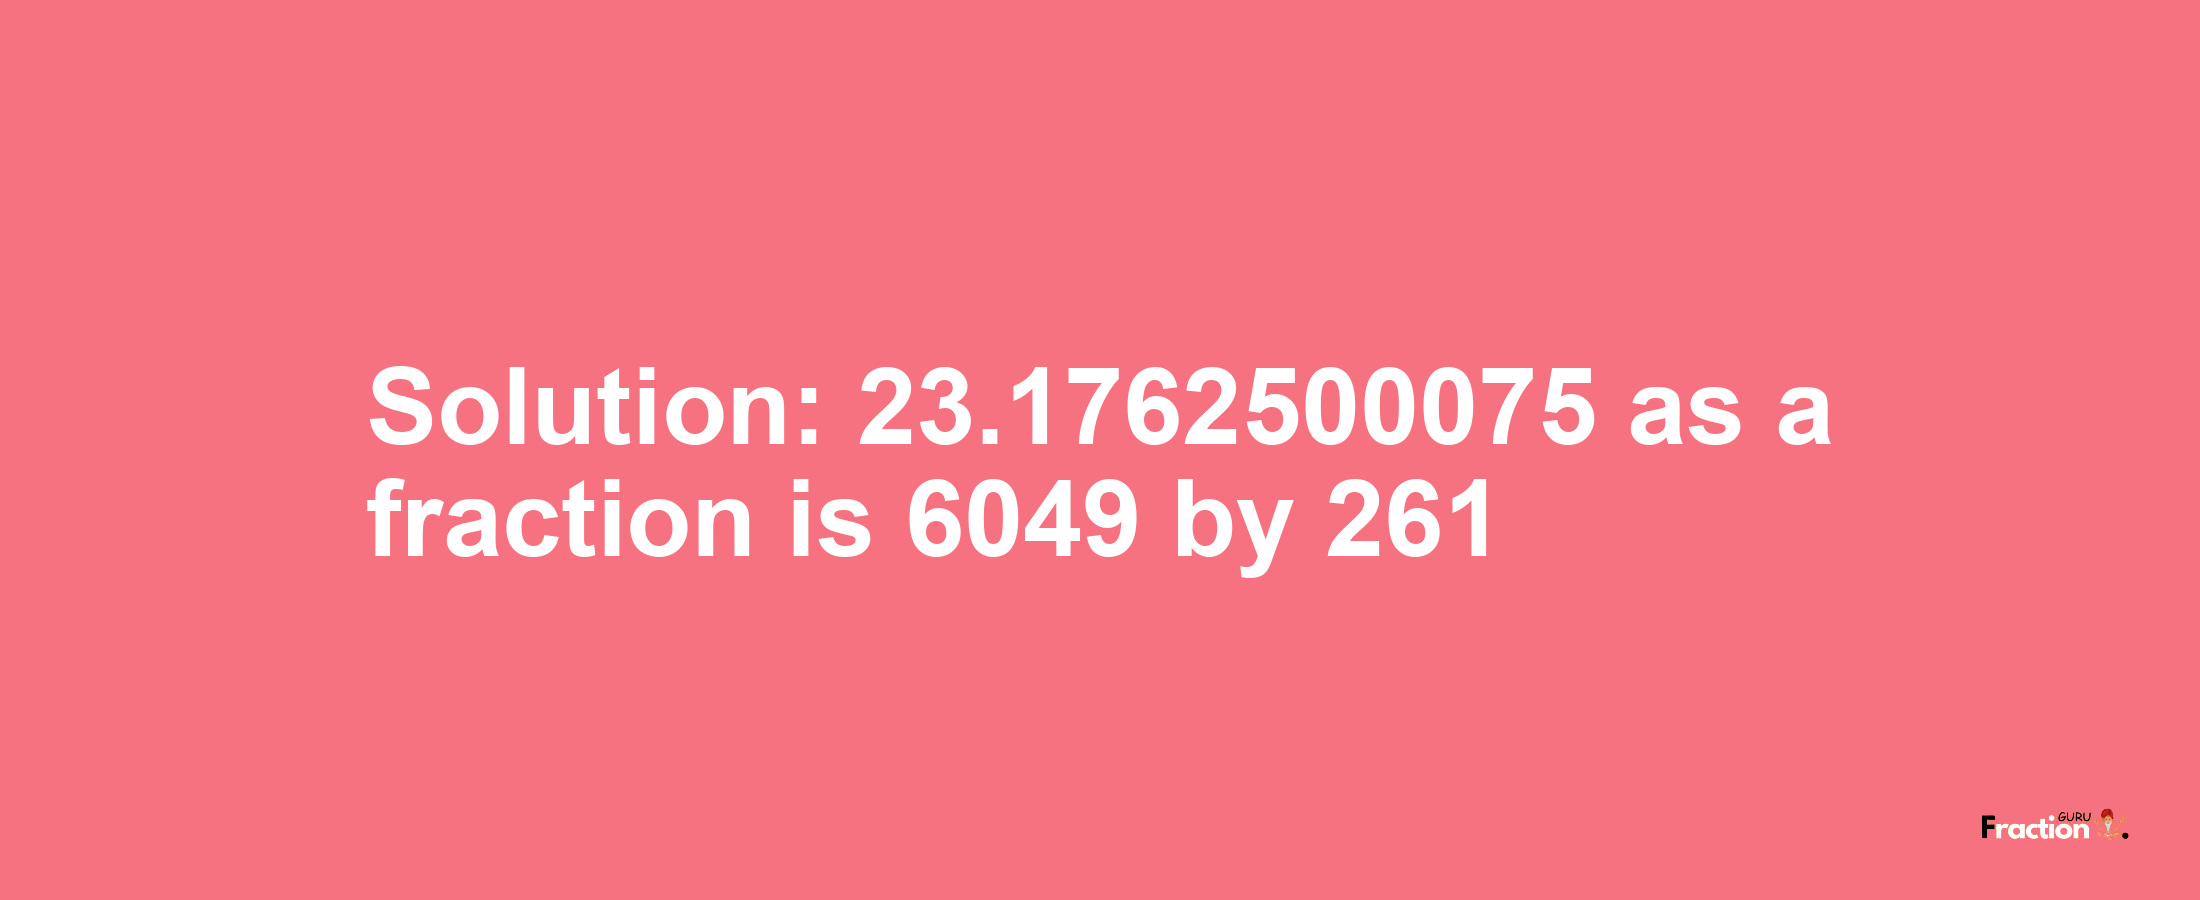 Solution:23.1762500075 as a fraction is 6049/261